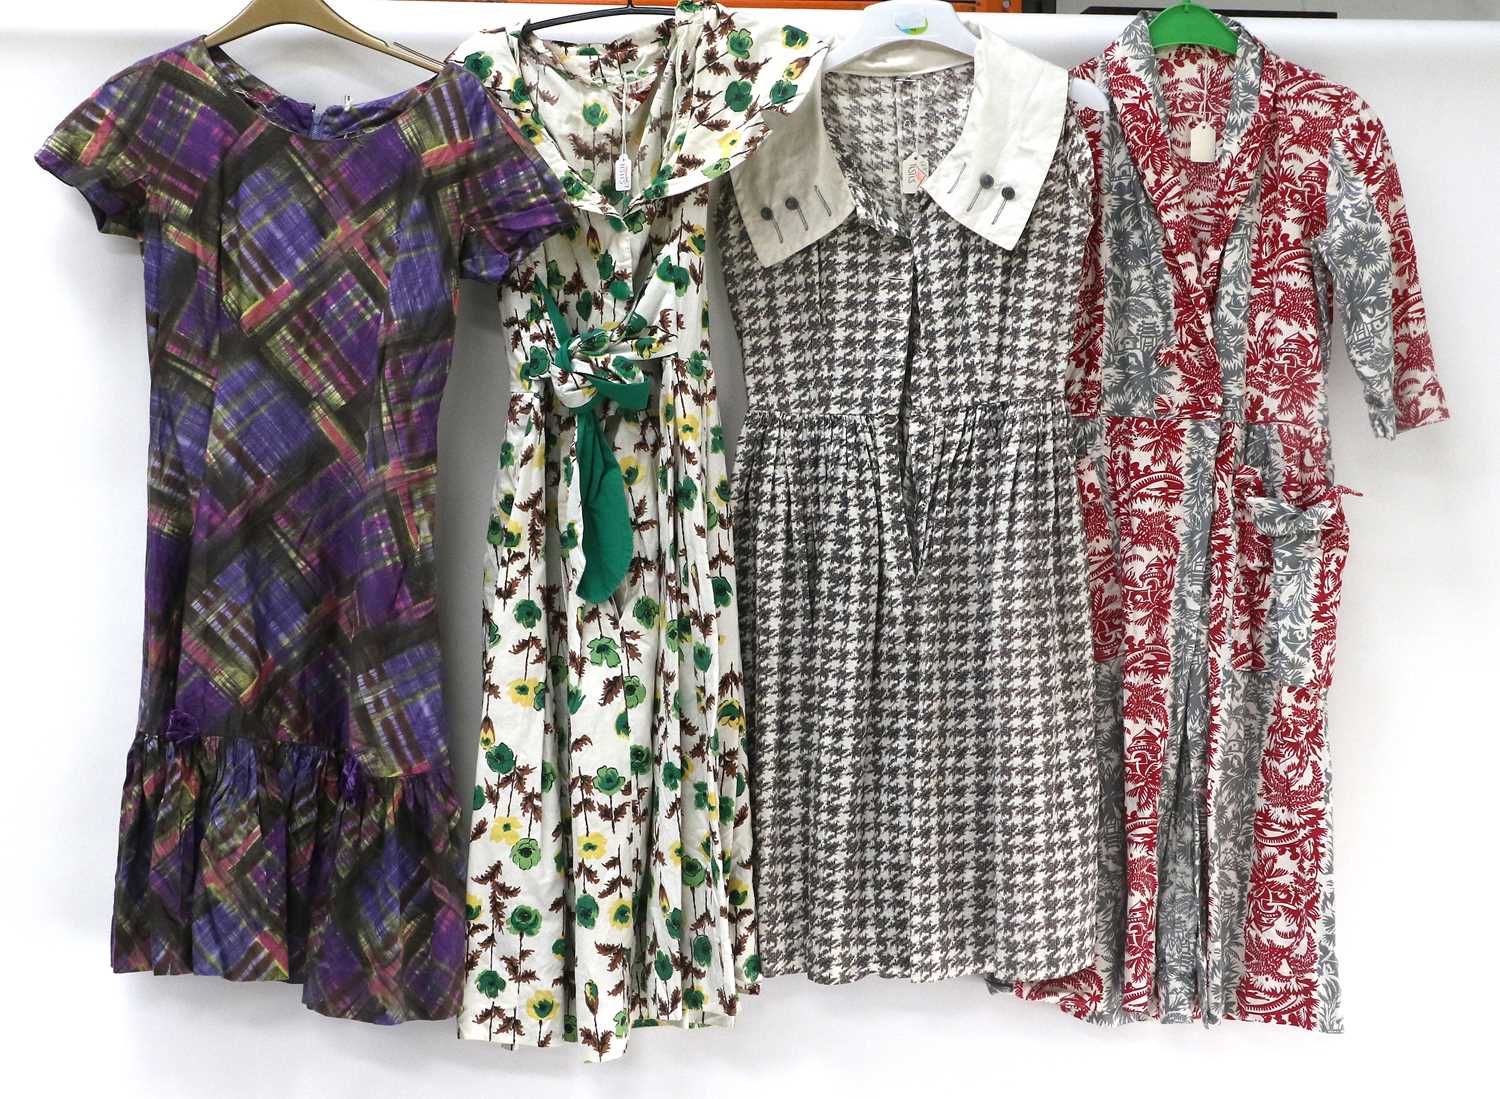 Circa 1950s and Later Printed Cotton Dresses, comprising California sleeveless dress printed with - Image 2 of 4